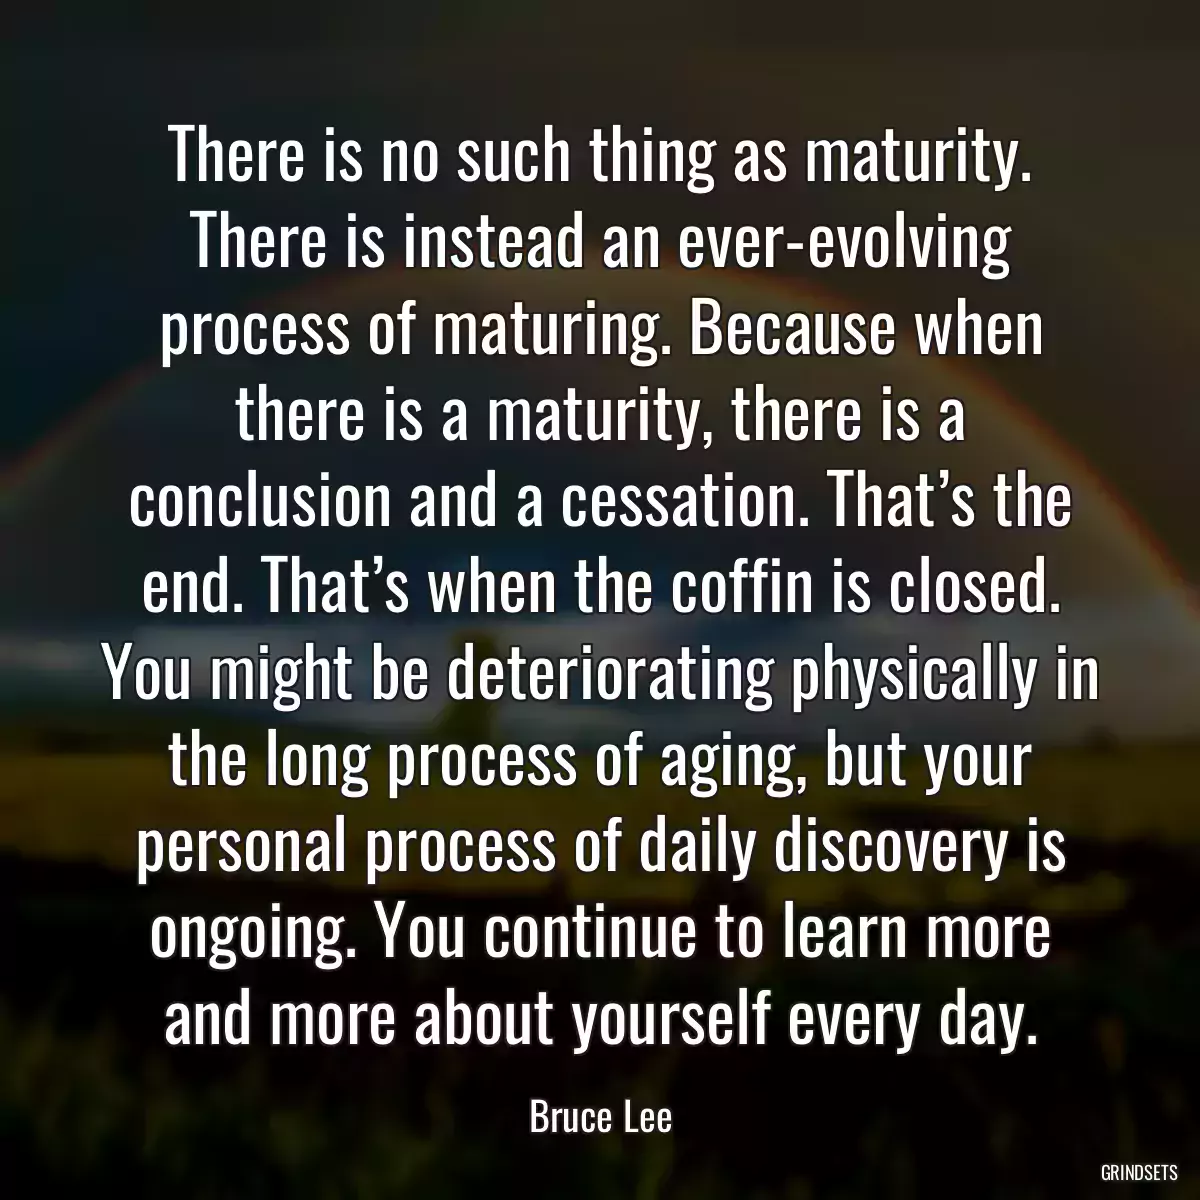 There is no such thing as maturity. There is instead an ever-evolving process of maturing. Because when there is a maturity, there is a conclusion and a cessation. That’s the end. That’s when the coffin is closed. You might be deteriorating physically in the long process of aging, but your personal process of daily discovery is ongoing. You continue to learn more and more about yourself every day.